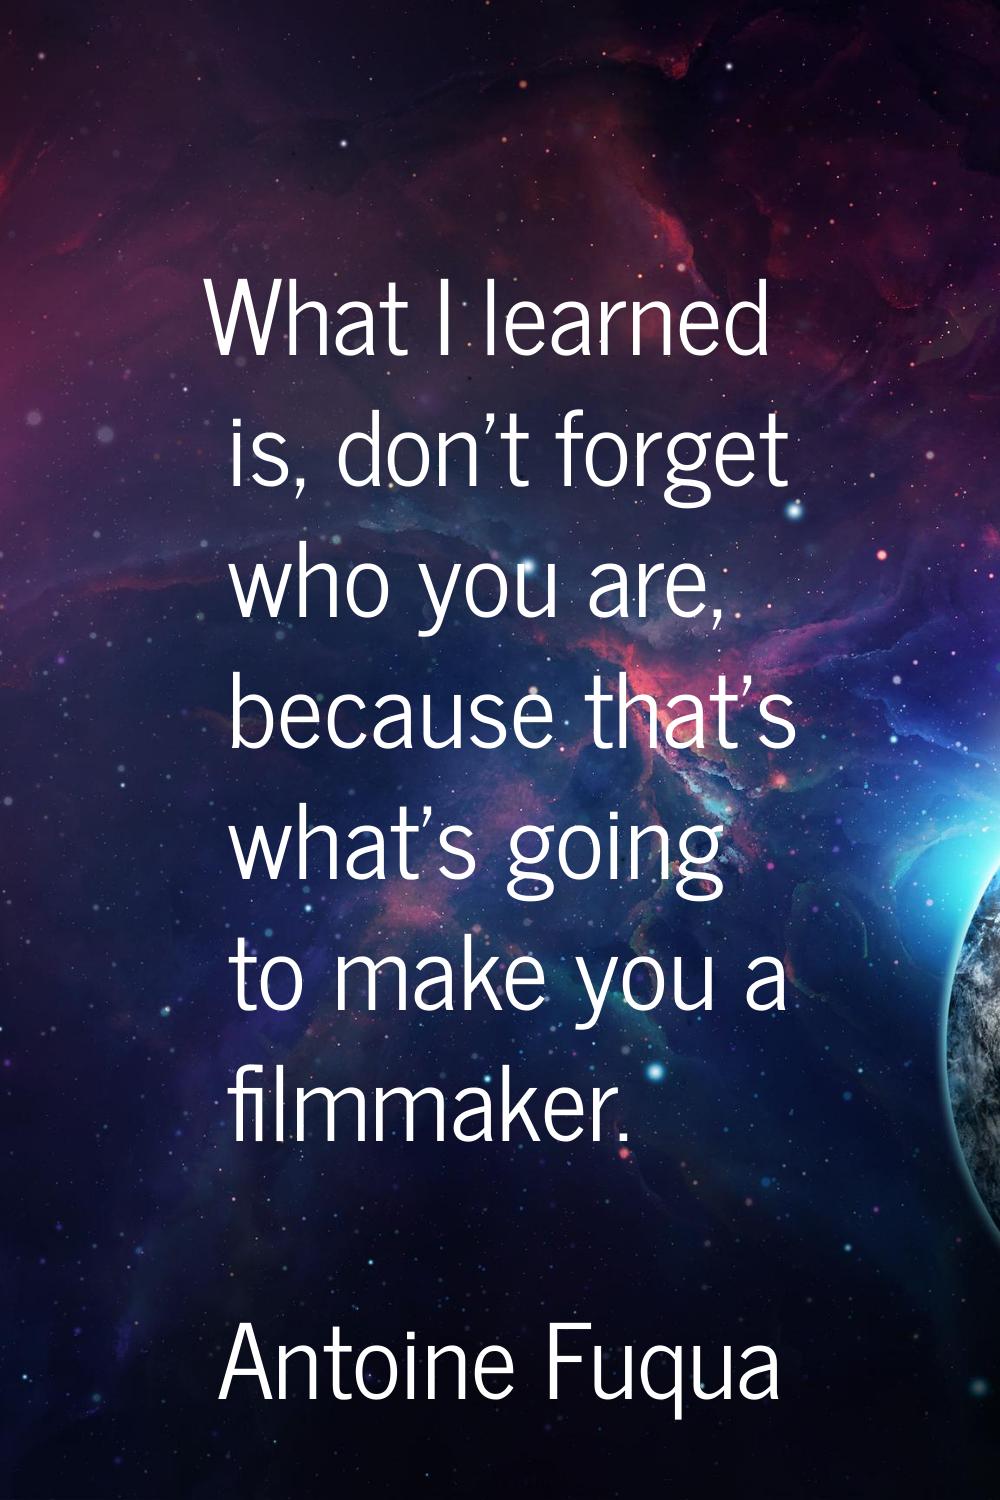 What I learned is, don't forget who you are, because that's what's going to make you a filmmaker.